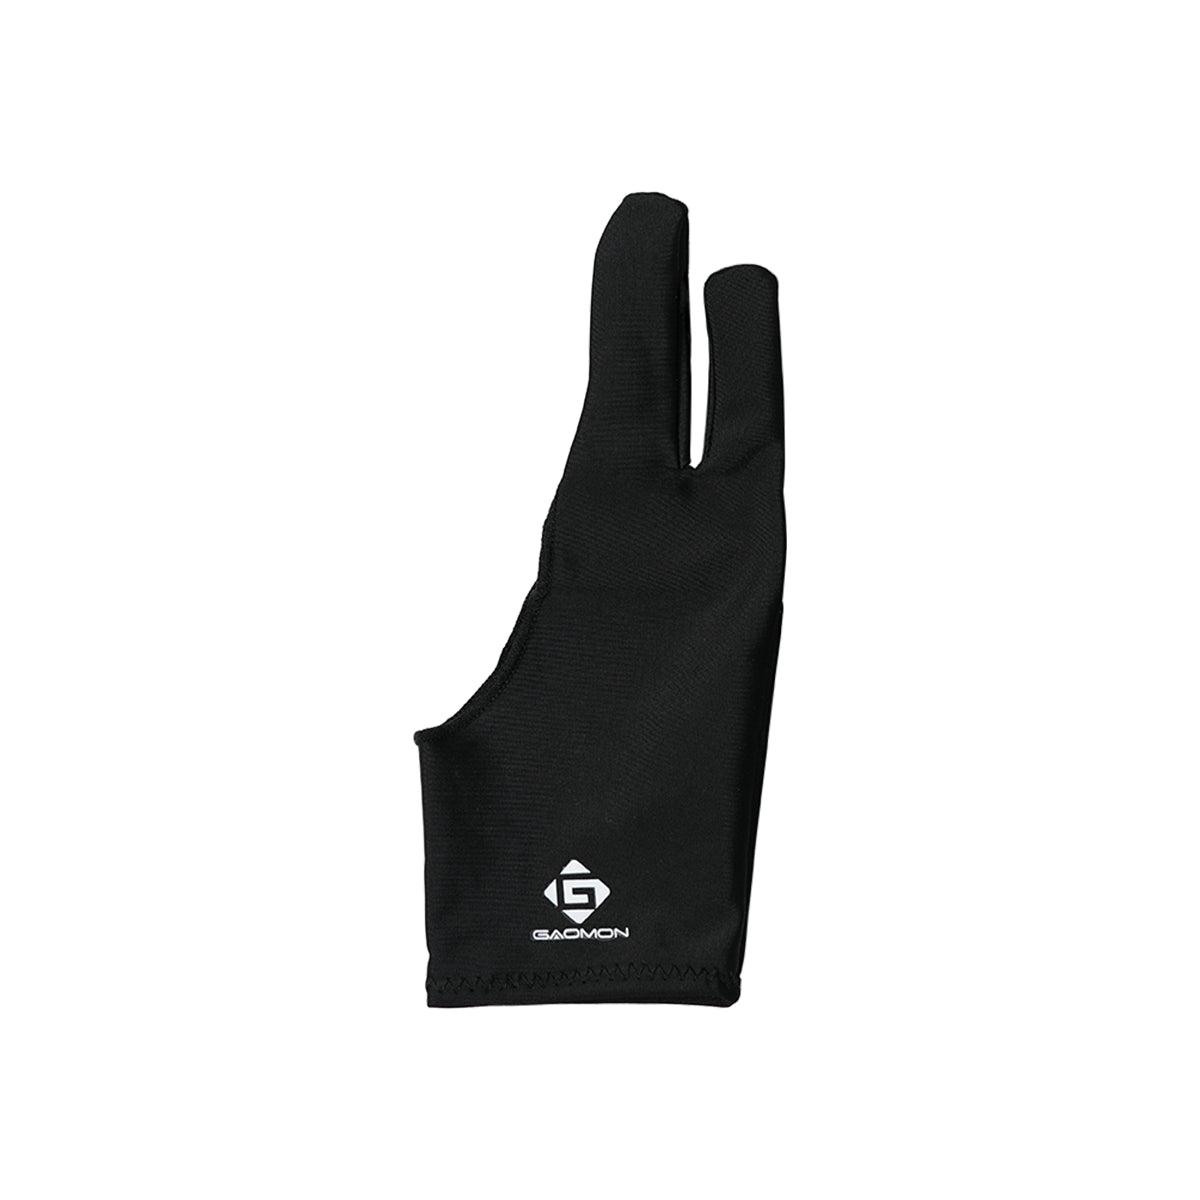 2 Fingers Drawing Glove Anti-fouling Artist Favor Any Graphics